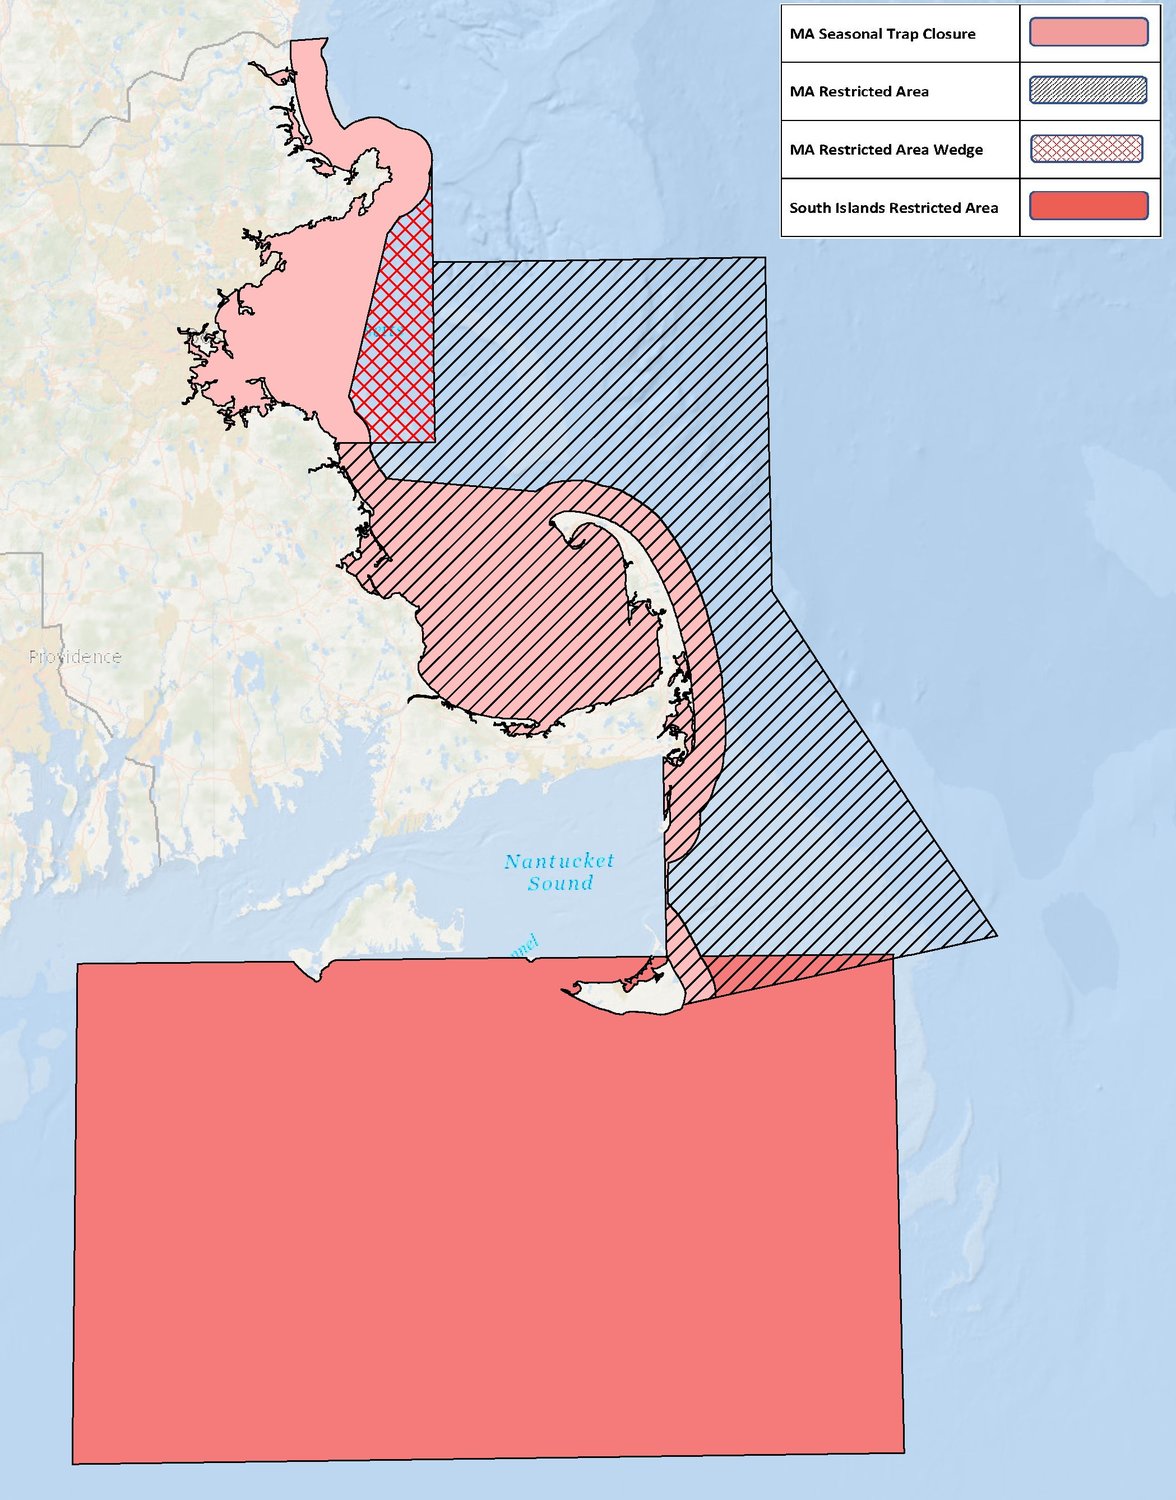 The Massachusetts Division of Marine Fisheries implemented new fishing closures to help protect Right Whales that are in local waters much earlier than normal.